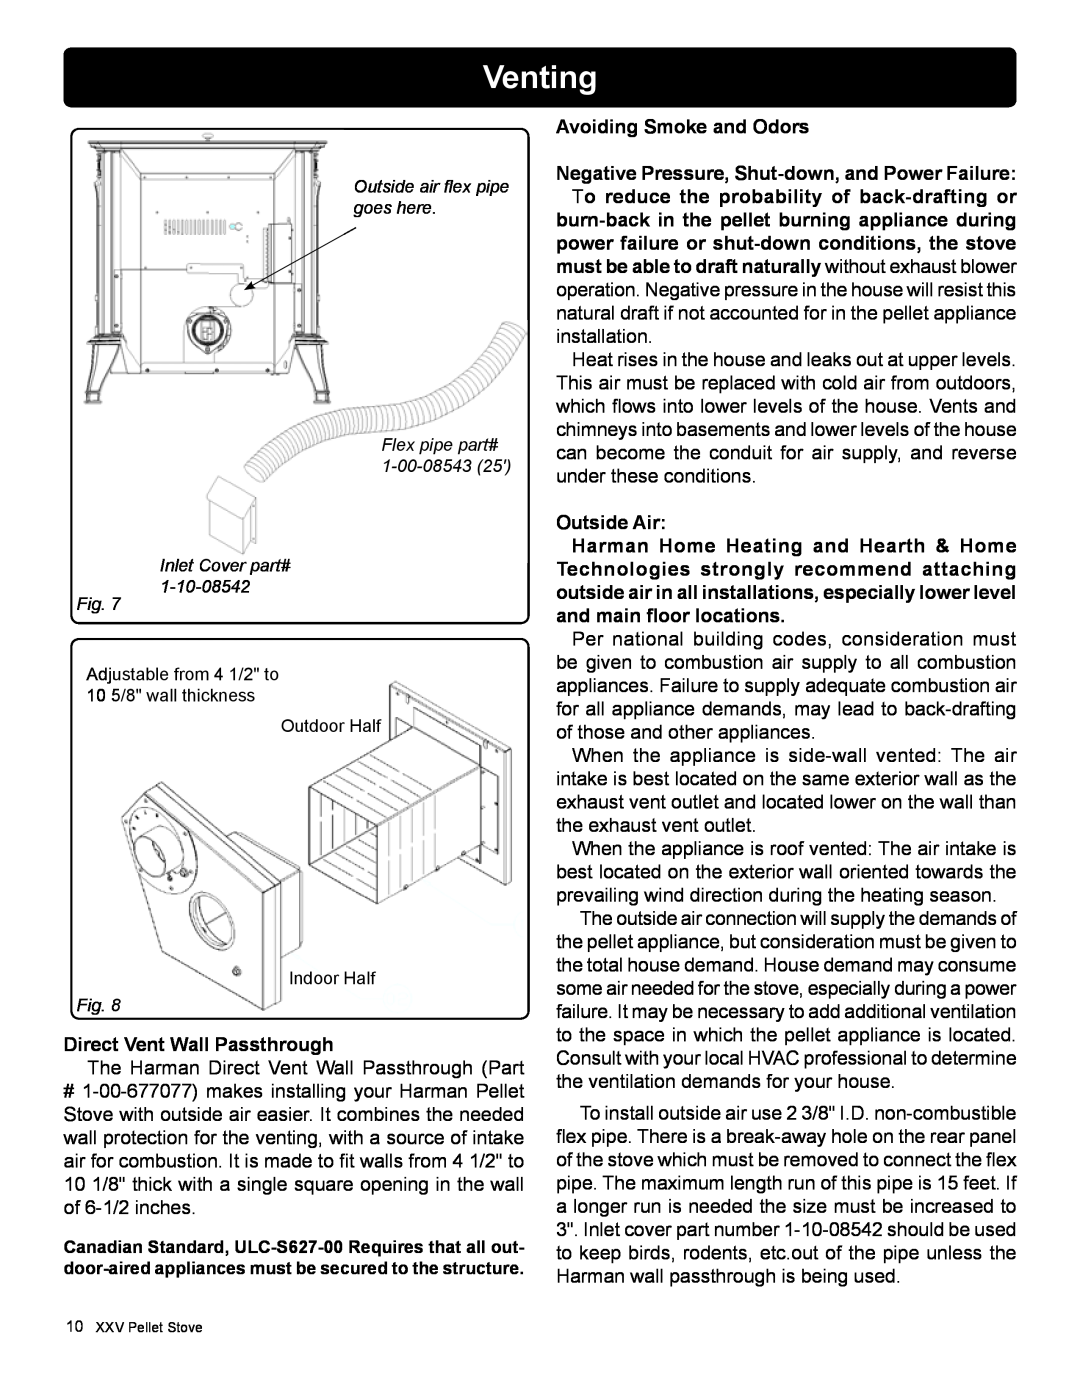 Harman Stove Company R16 manual Venting, Avoiding Smoke and Odors, Outside Air, Direct Vent Wall Passthrough 